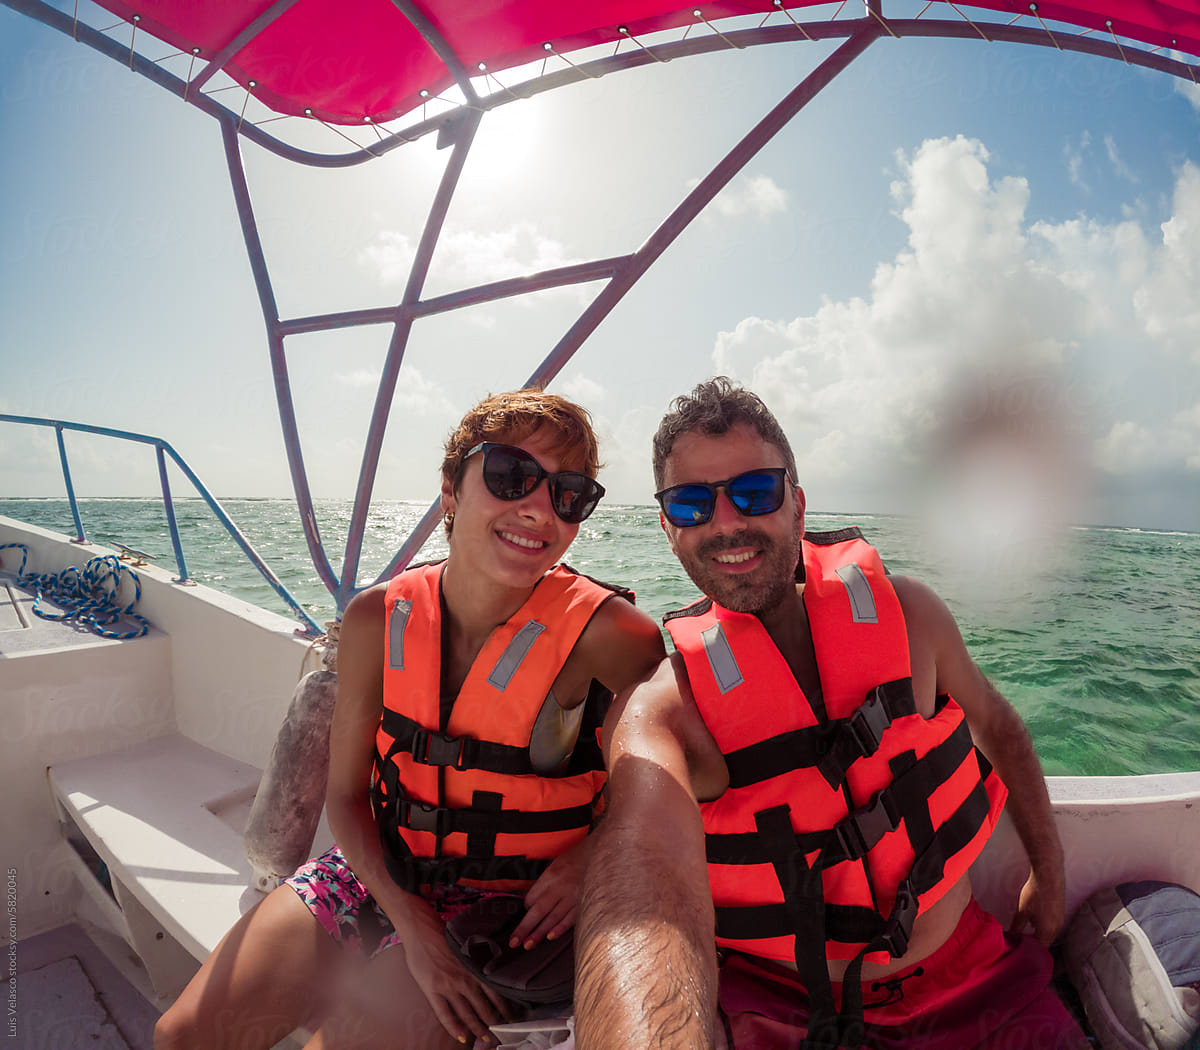 Couple With Sunglasses On A Boat During Holidays.